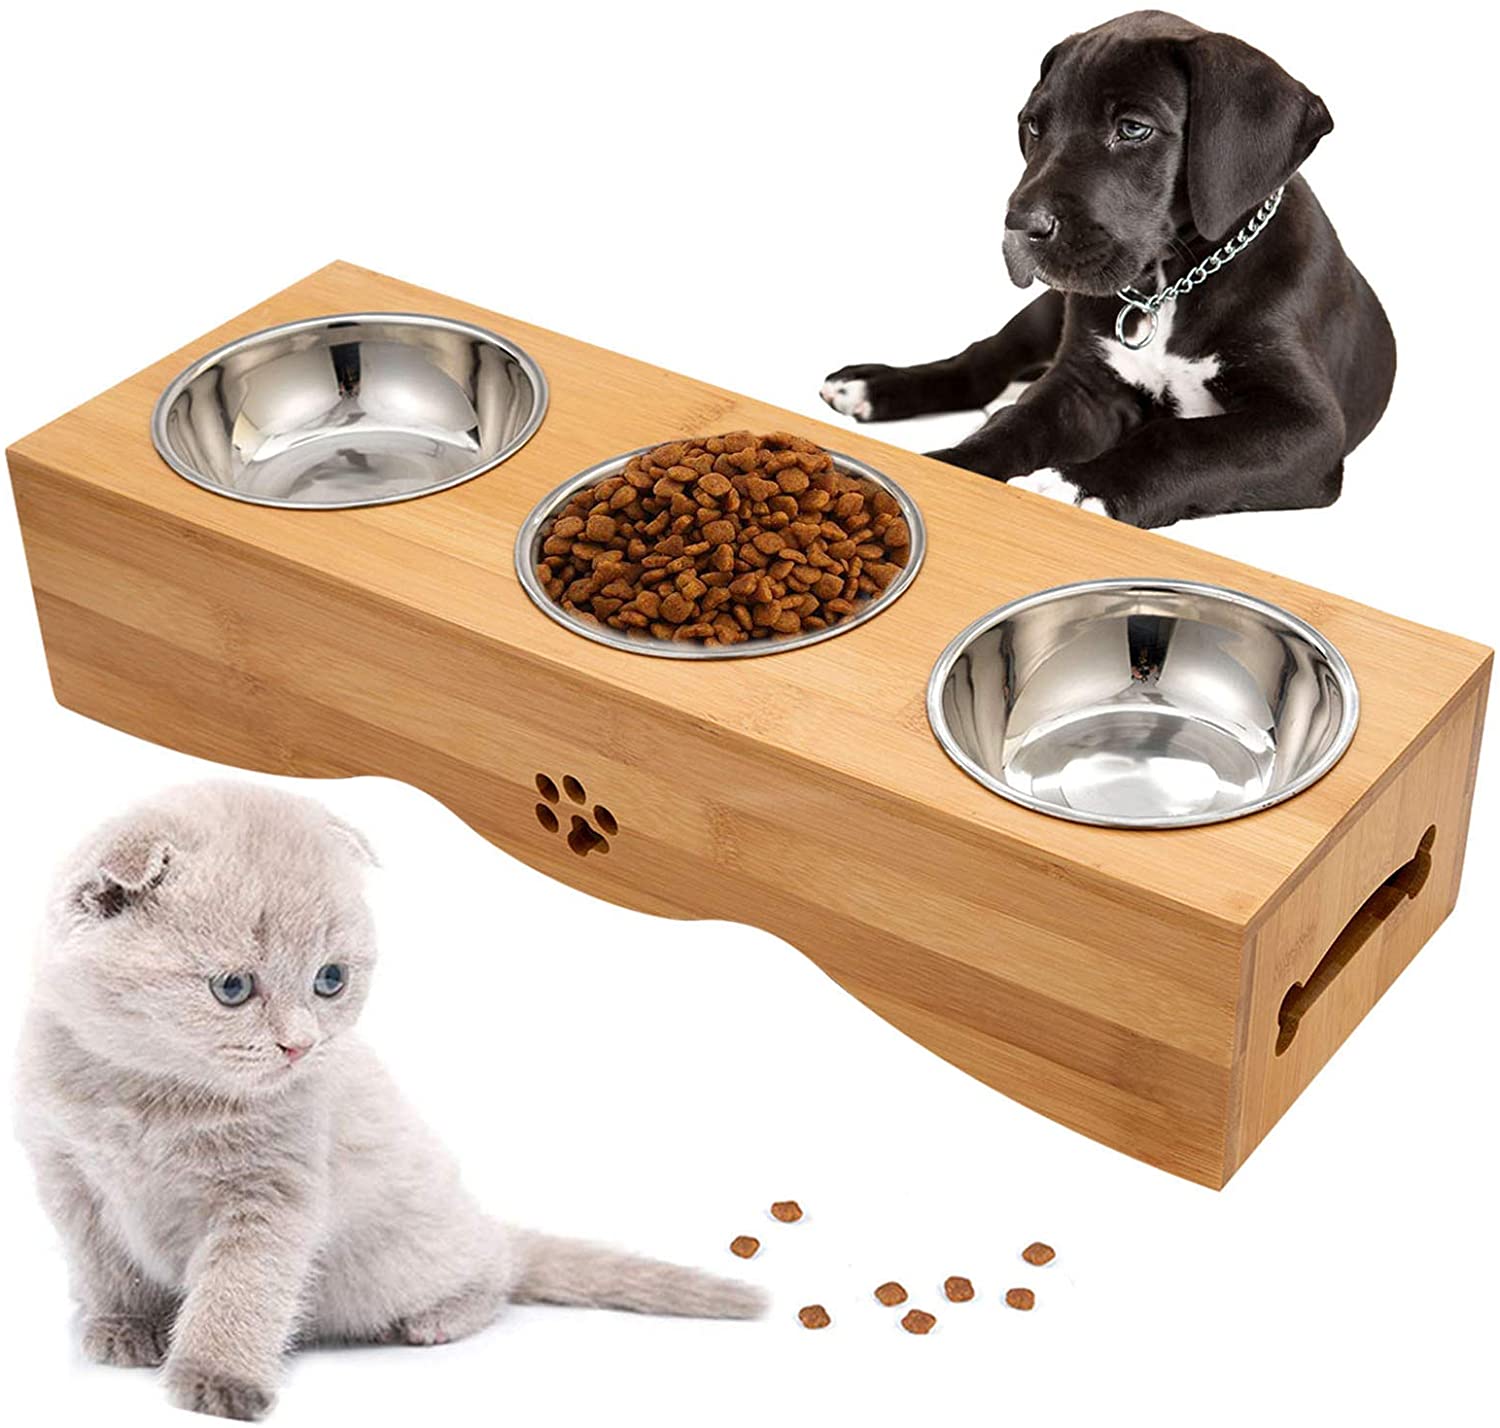 factory Outlets for Men Gifts -  hot selling Pet Dog Cat Bowls Stand Height Feeding Station with stainless pet bowl – Shunstone